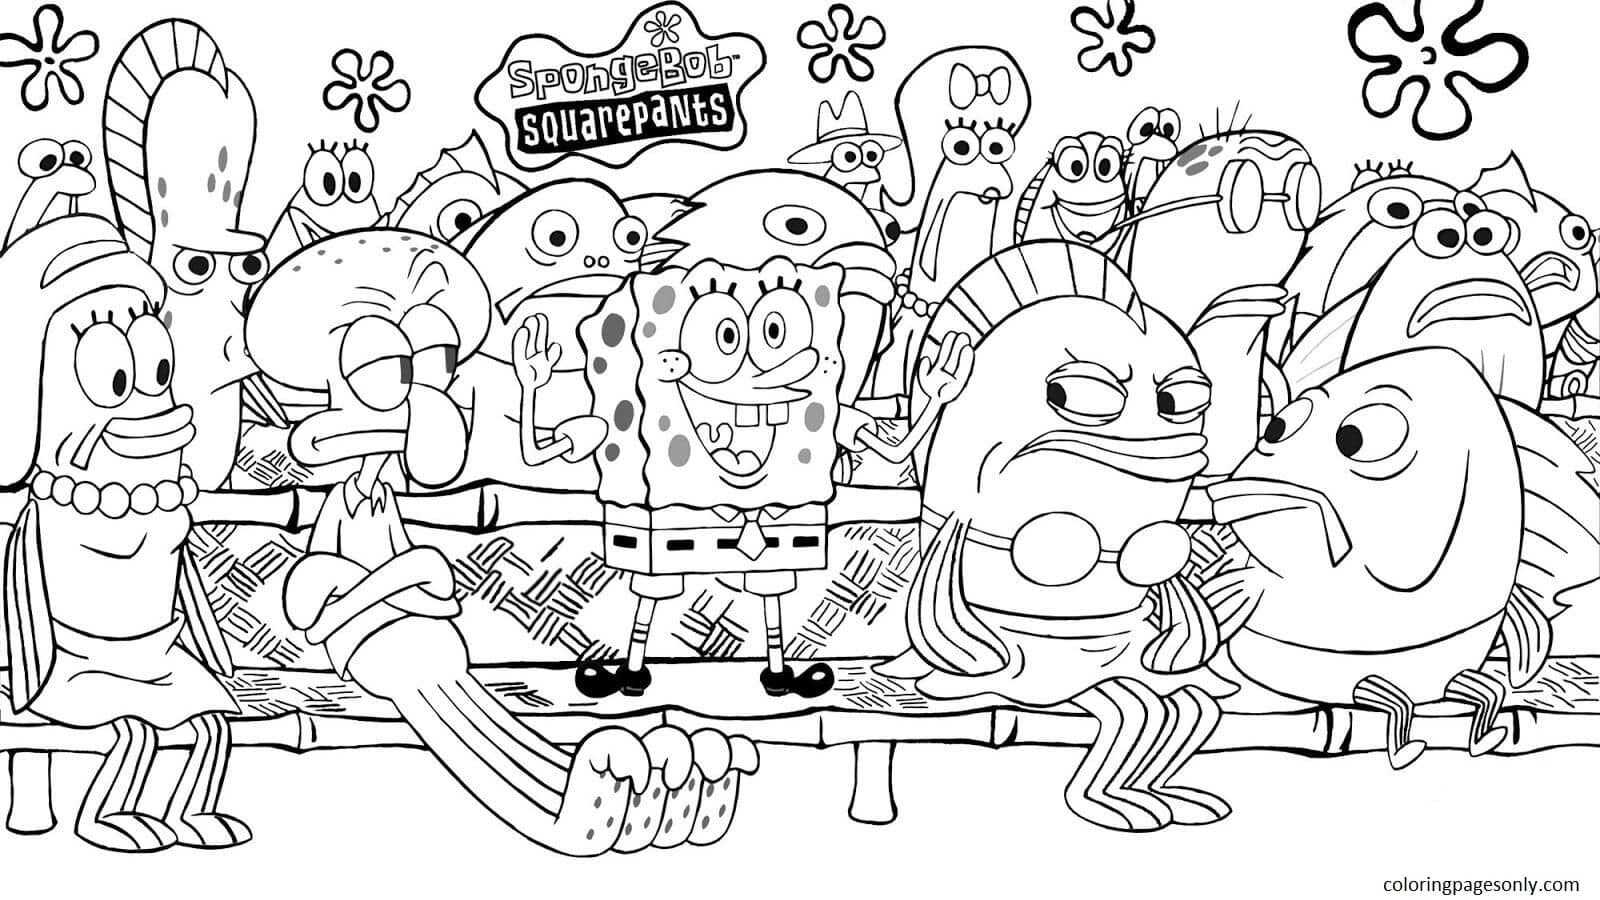 Spongebob And Friends Coloring Pages